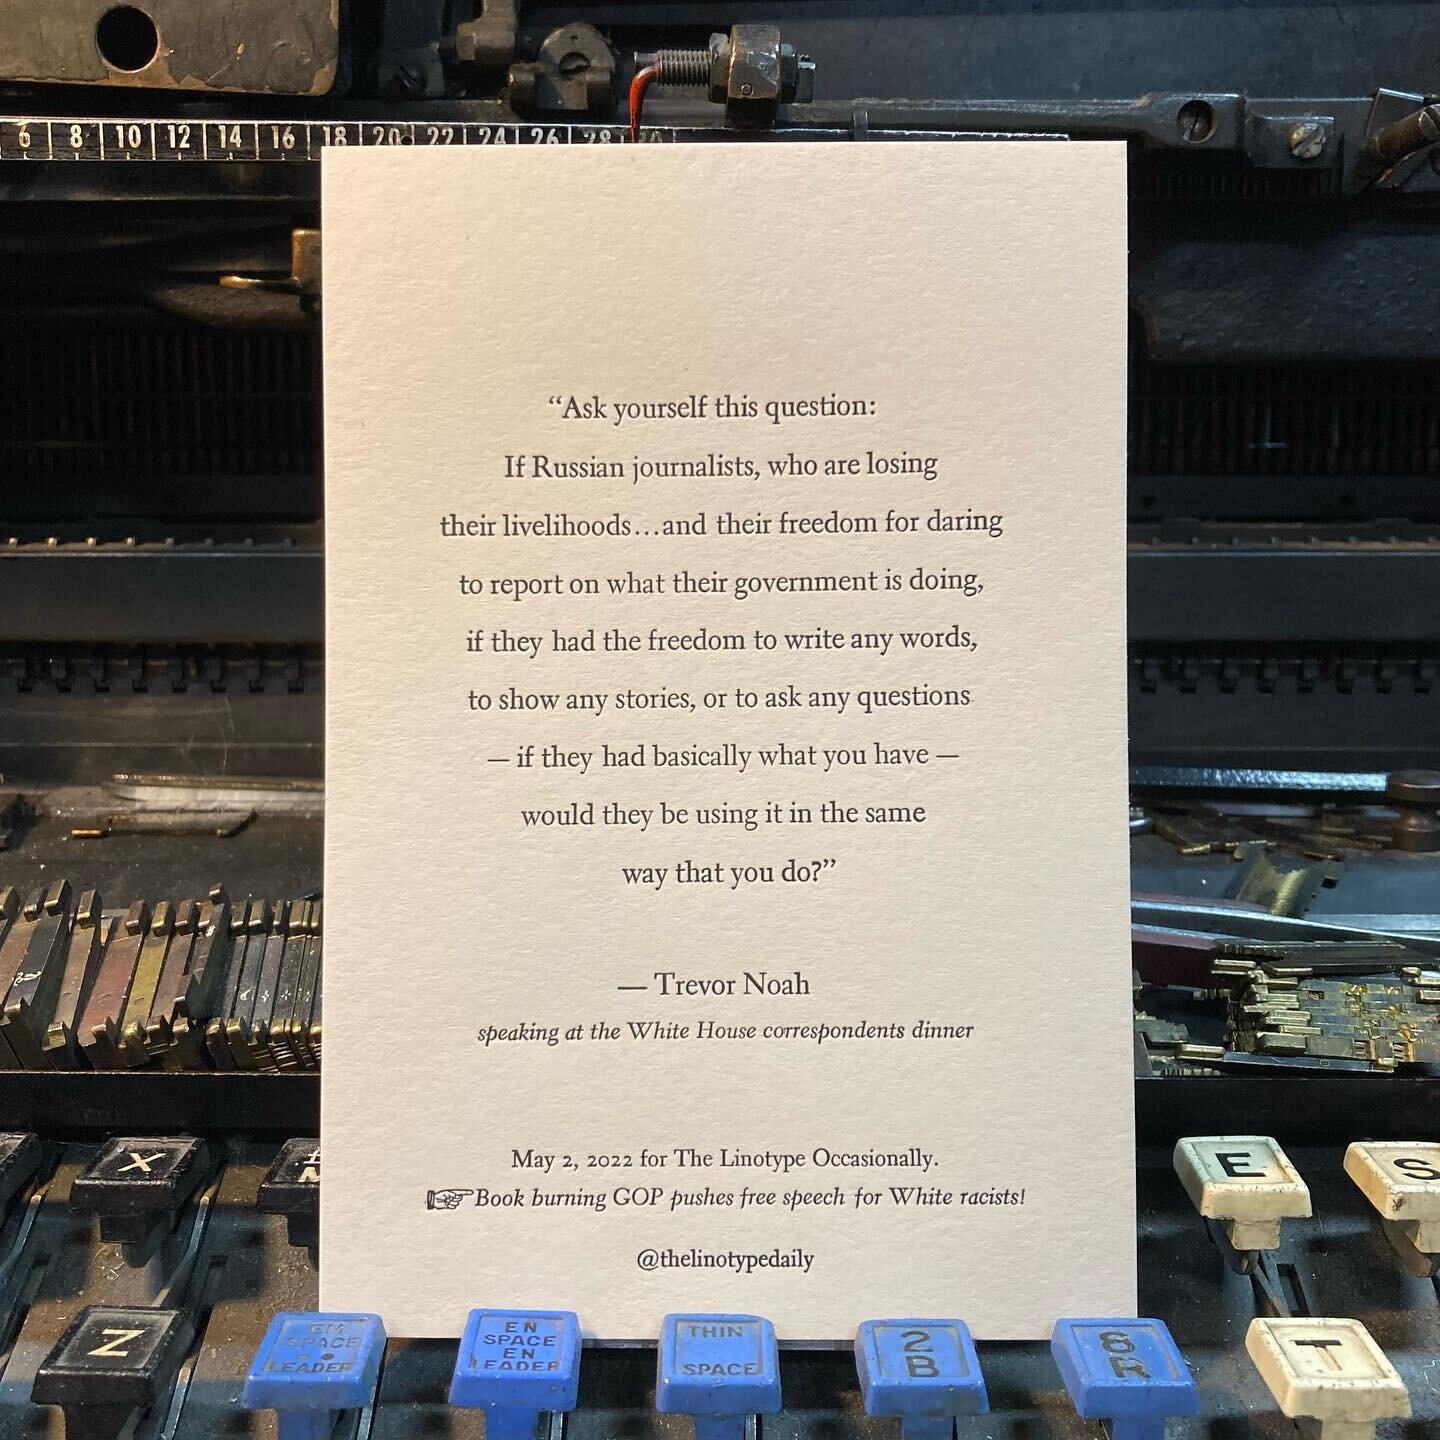 &ldquo;Ask yourself that question every day.&rdquo; -Trevor Noah. #linotype #letterpress #typecasting #hotmetaljournalism #whitehousecorrespondentsdinner #trevornoah #wadwiggins #electratypeface Cast in 8 and 11pt Electra with cursive